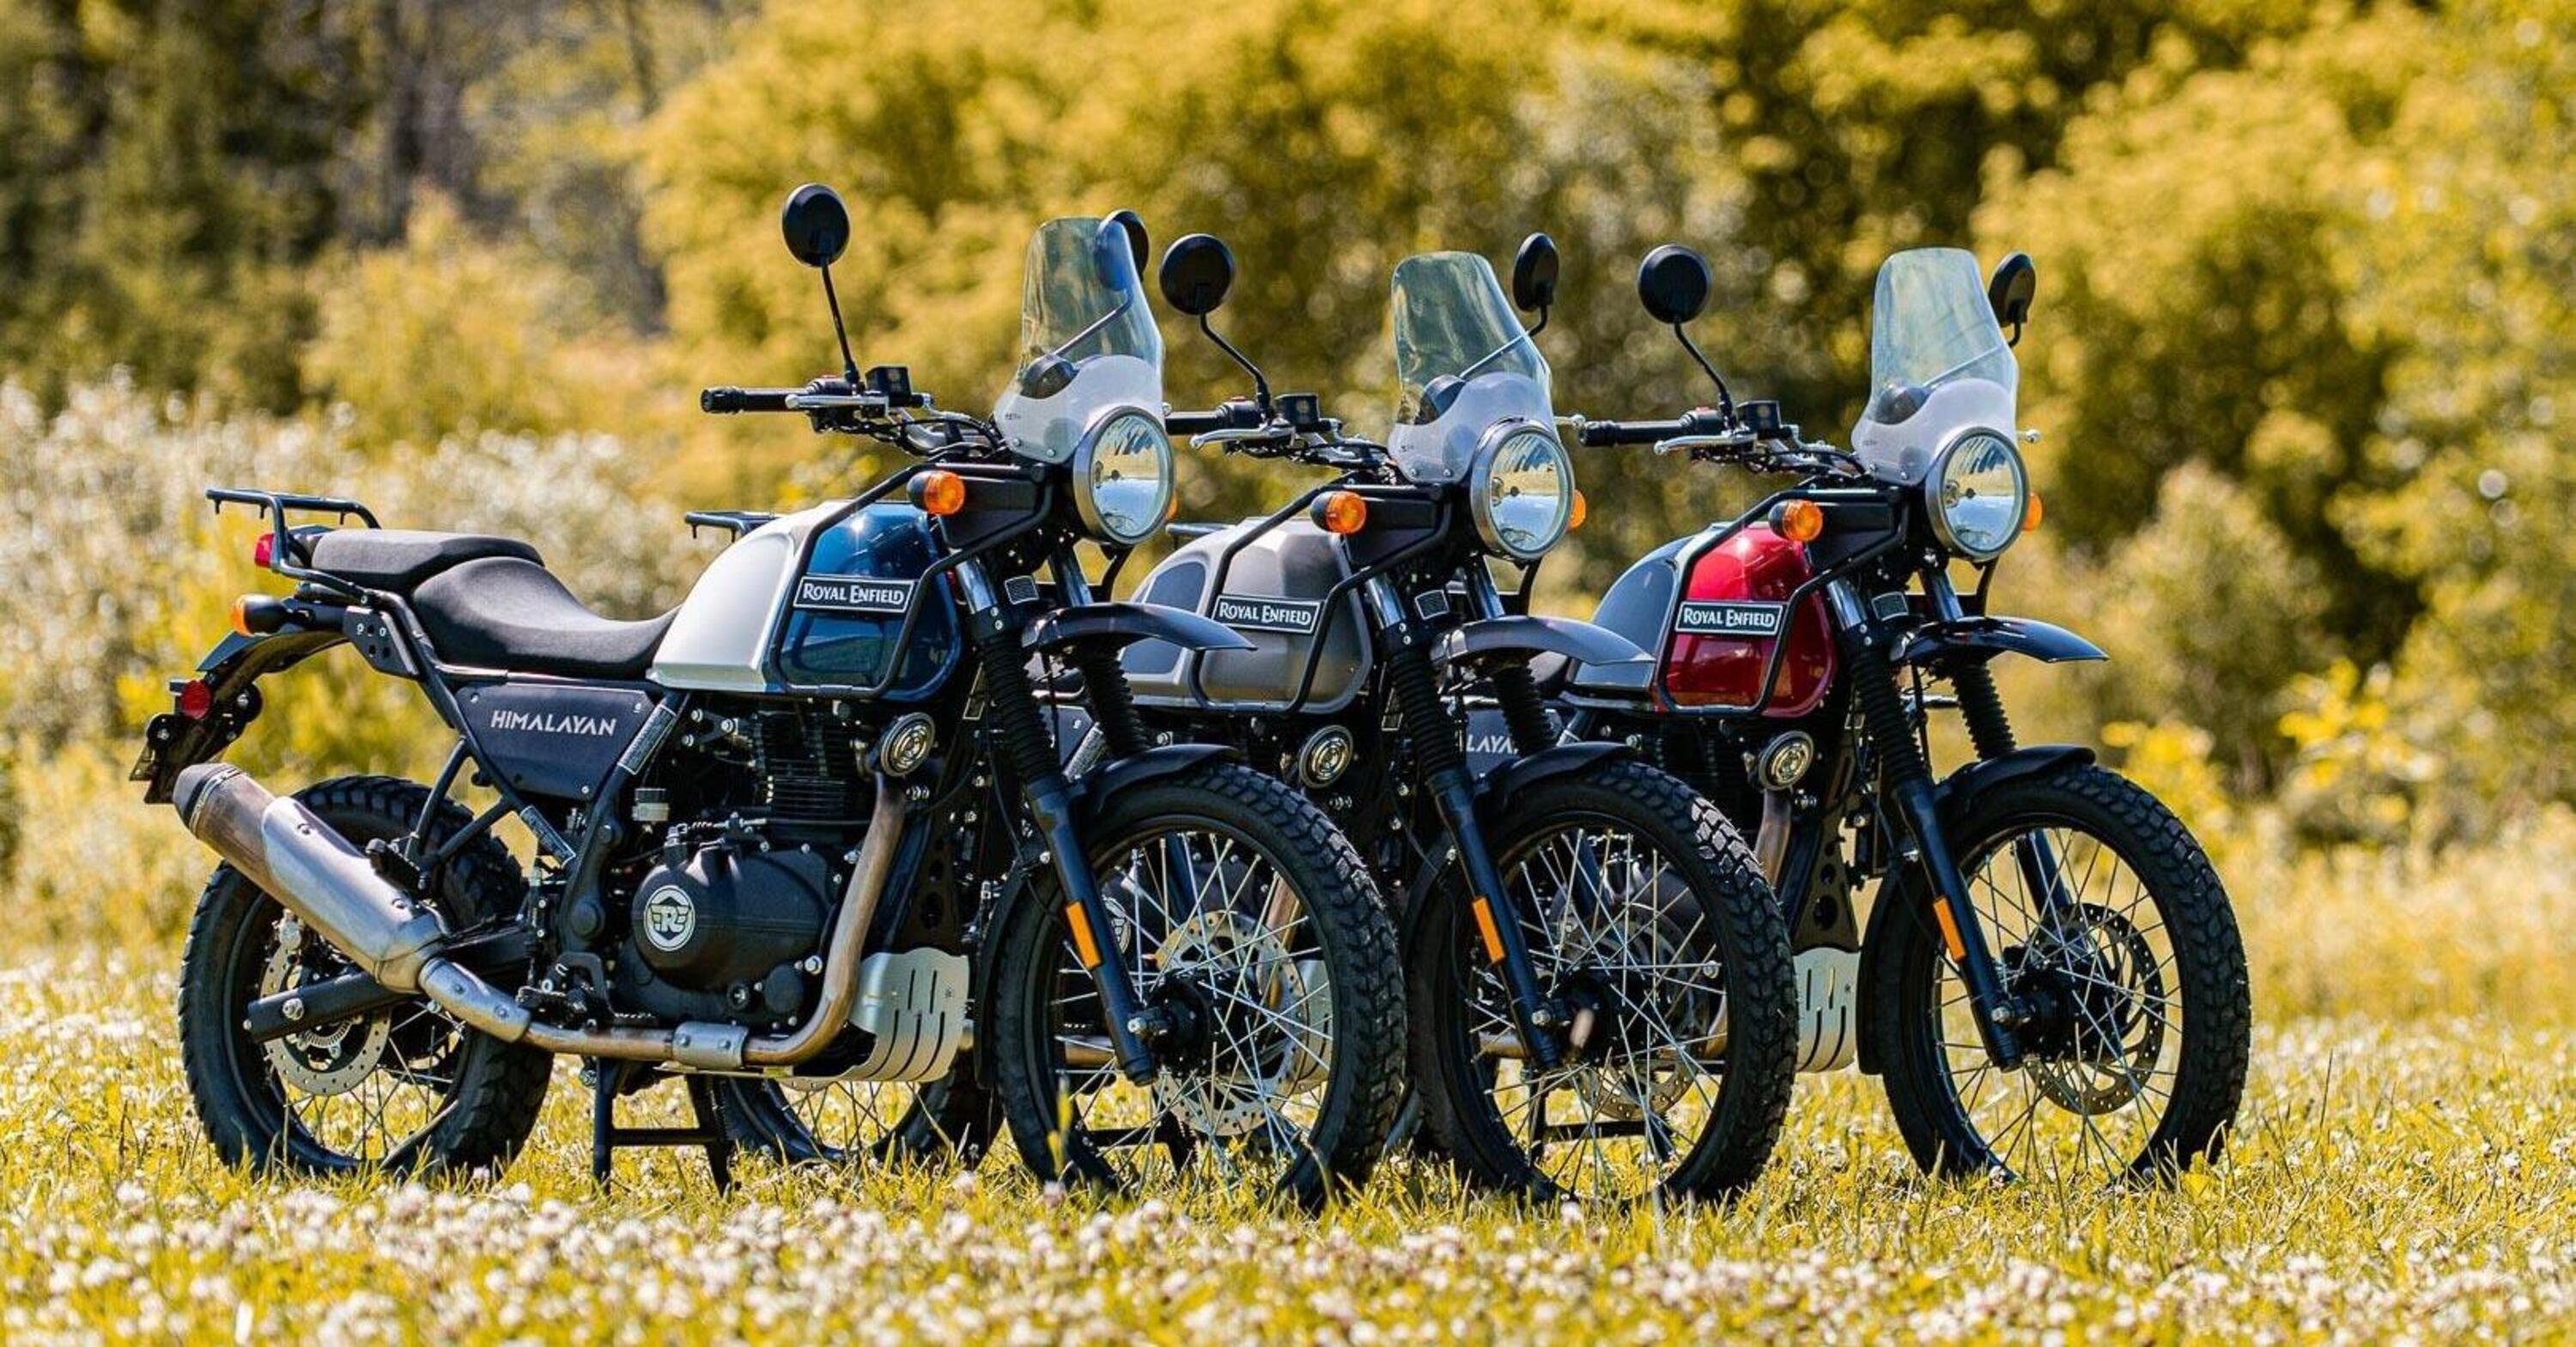 Royal Enfield Himalayan 650 in arrivo (sviluppata in UK)